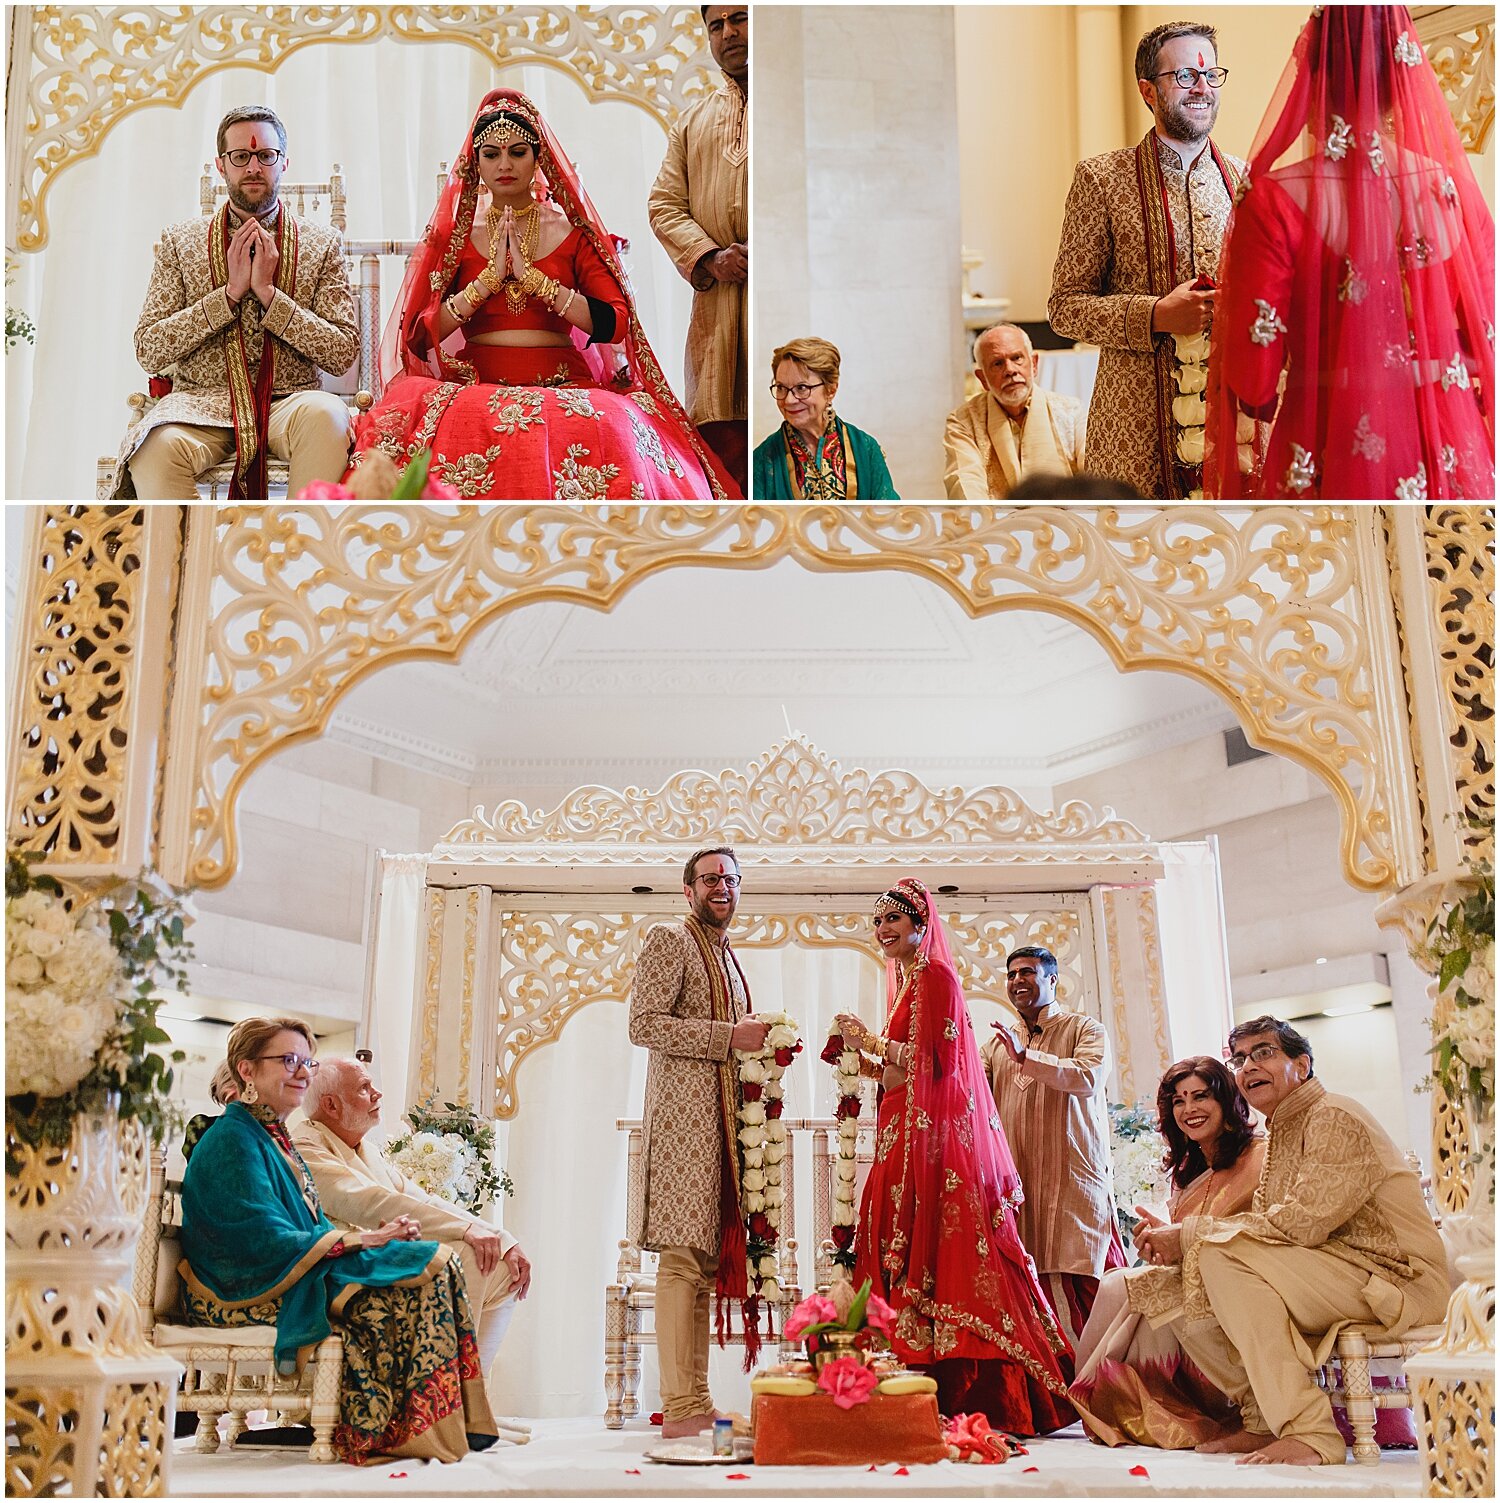  Indian wedding ceremony in MPLS 